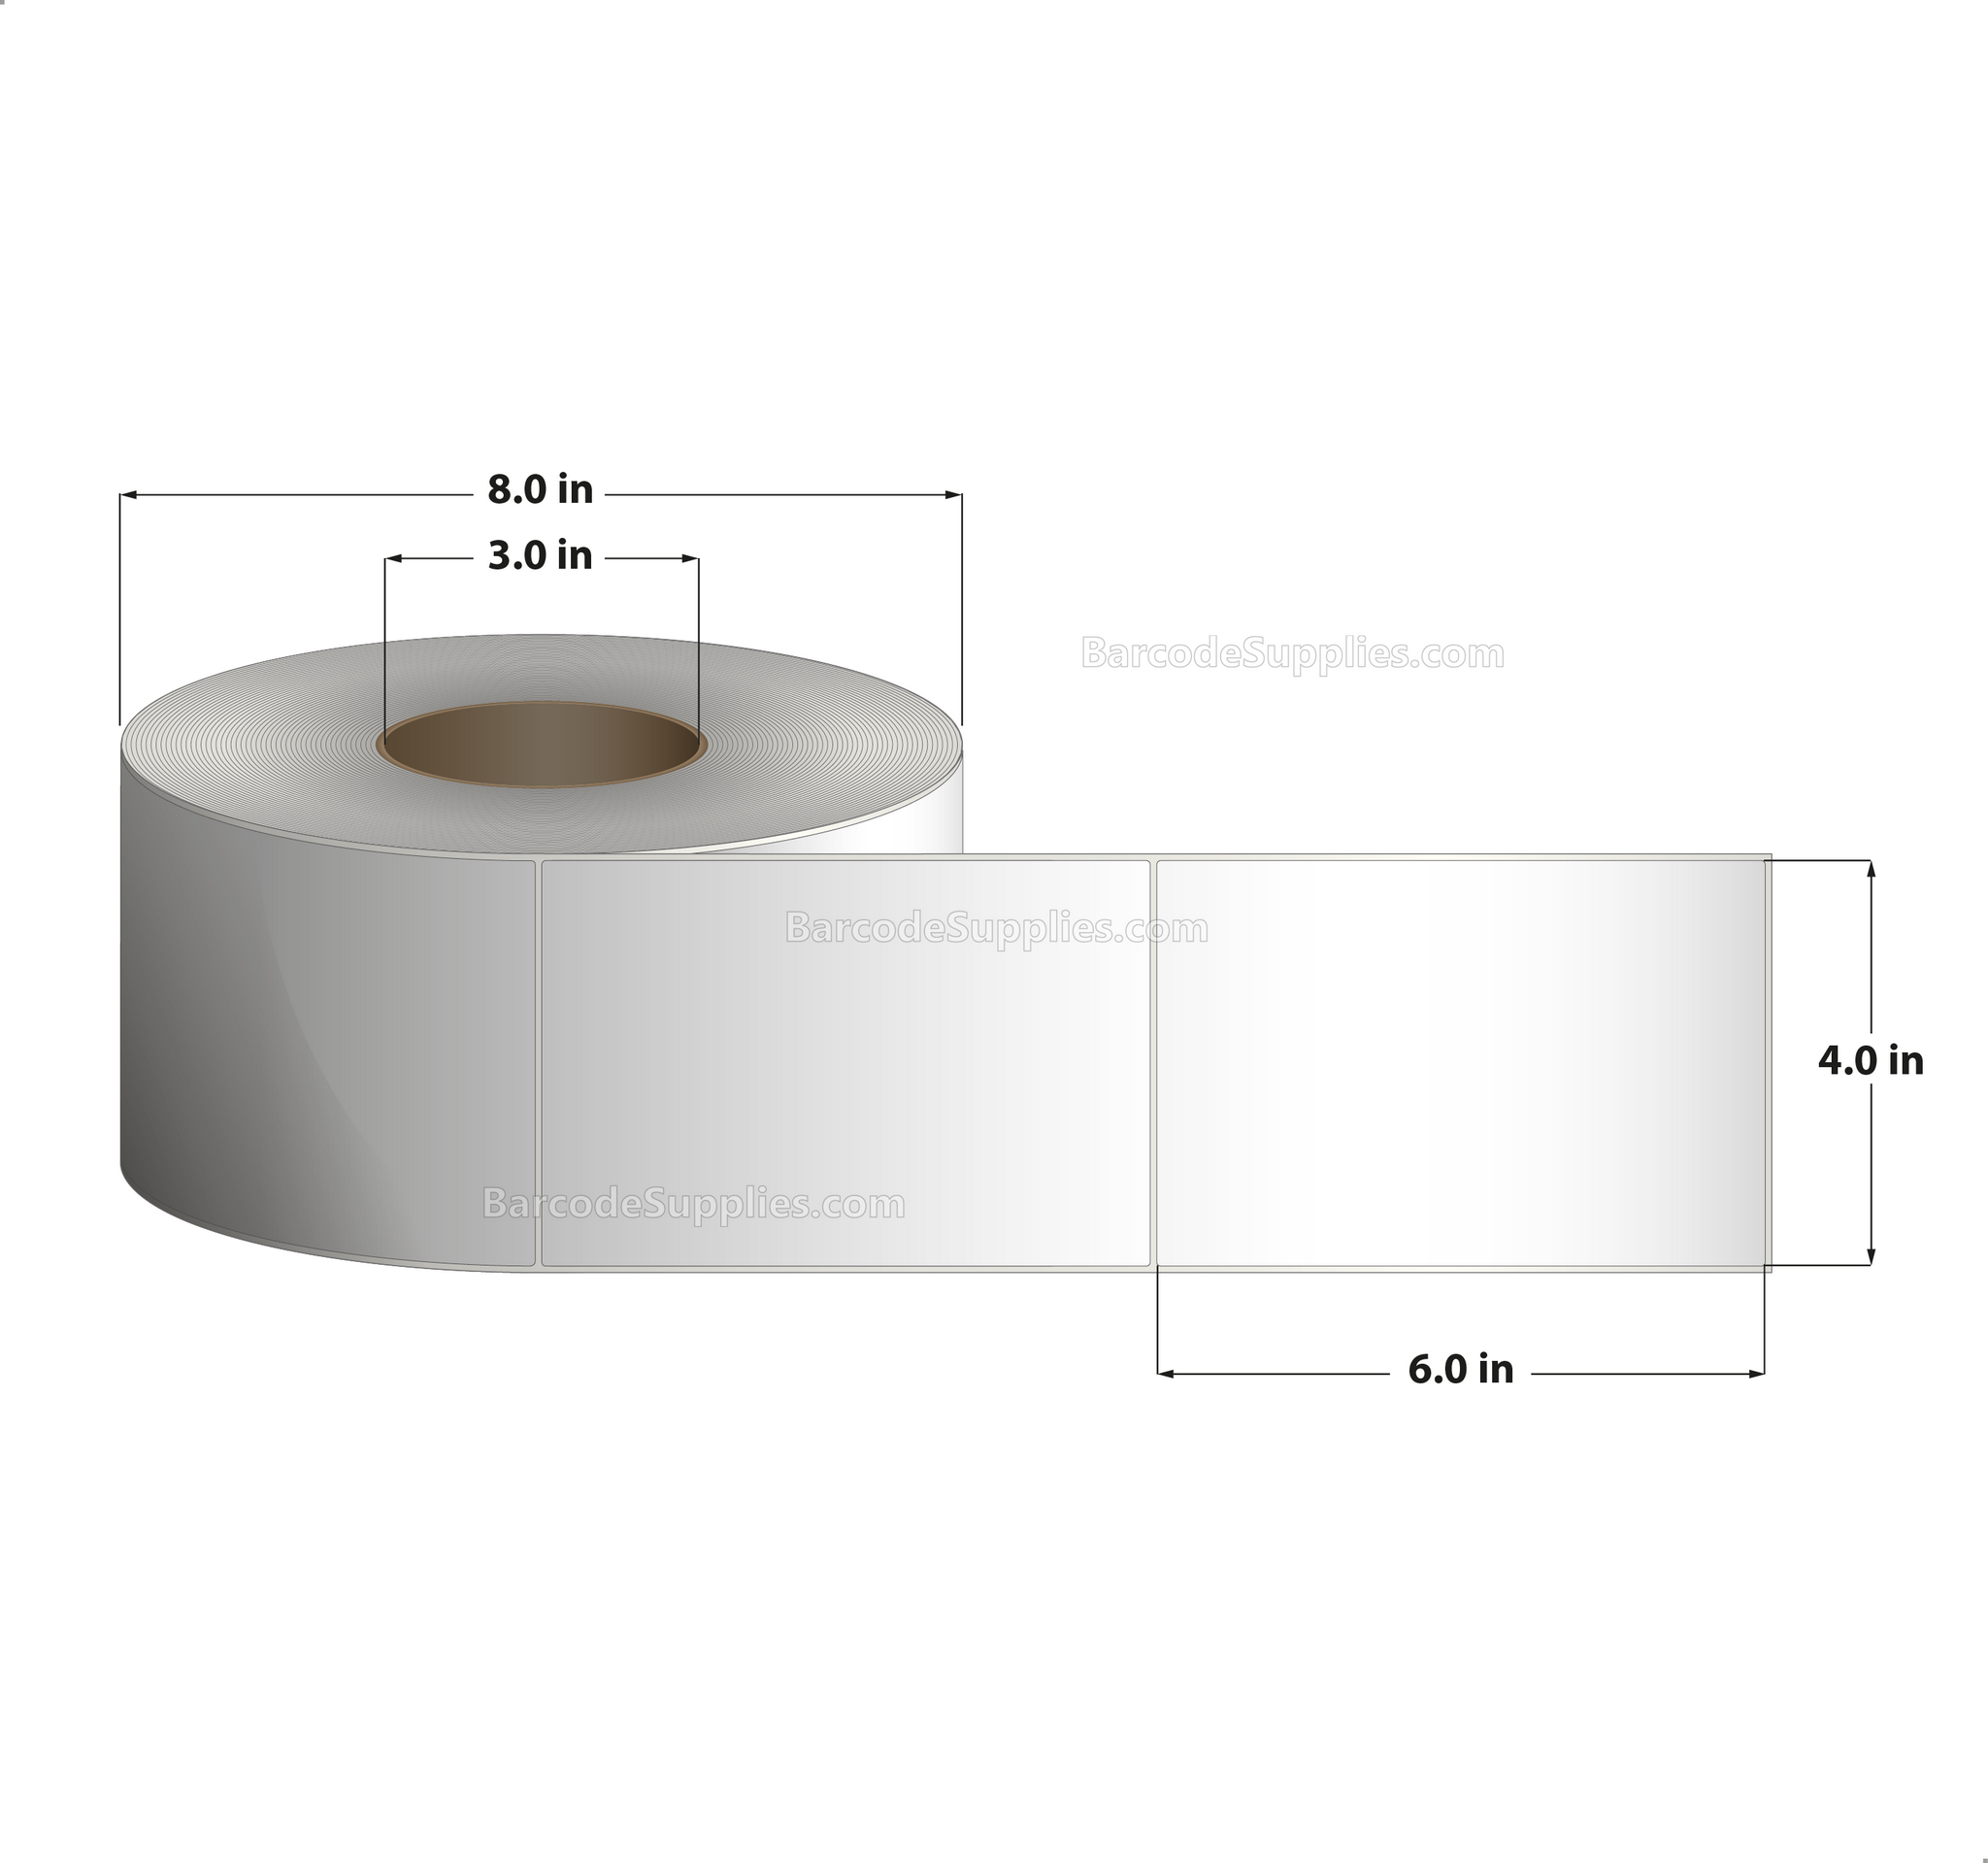 4 x 6 Thermal Transfer White Labels With Rubber Adhesive - No Perforation - 1000 Labels Per Roll - Carton Of 4 Rolls - 4000 Labels Total - MPN: CTT400600-3